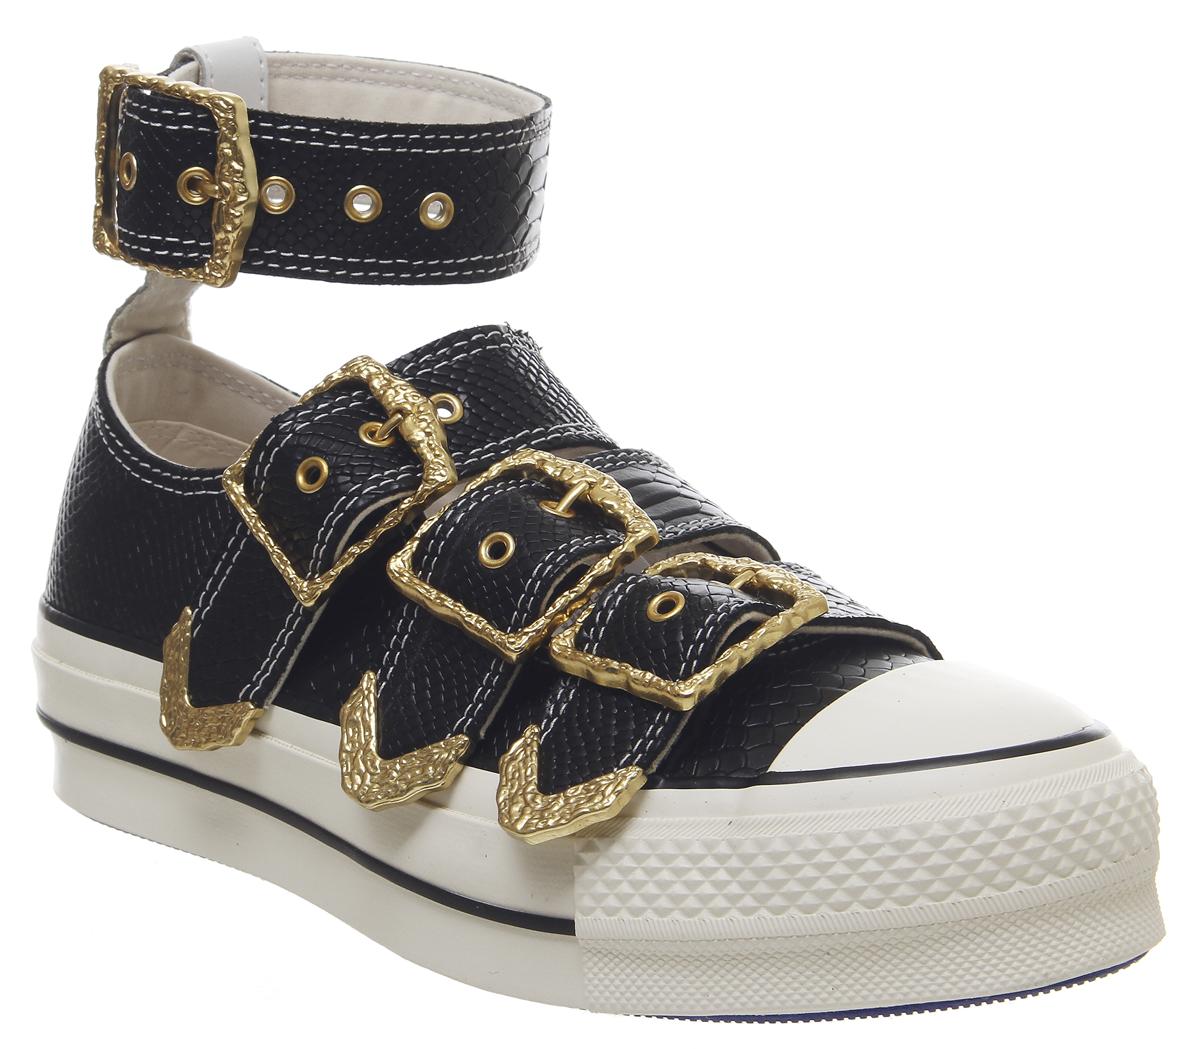 Converse All Star Mary Jane Ox Shoes 